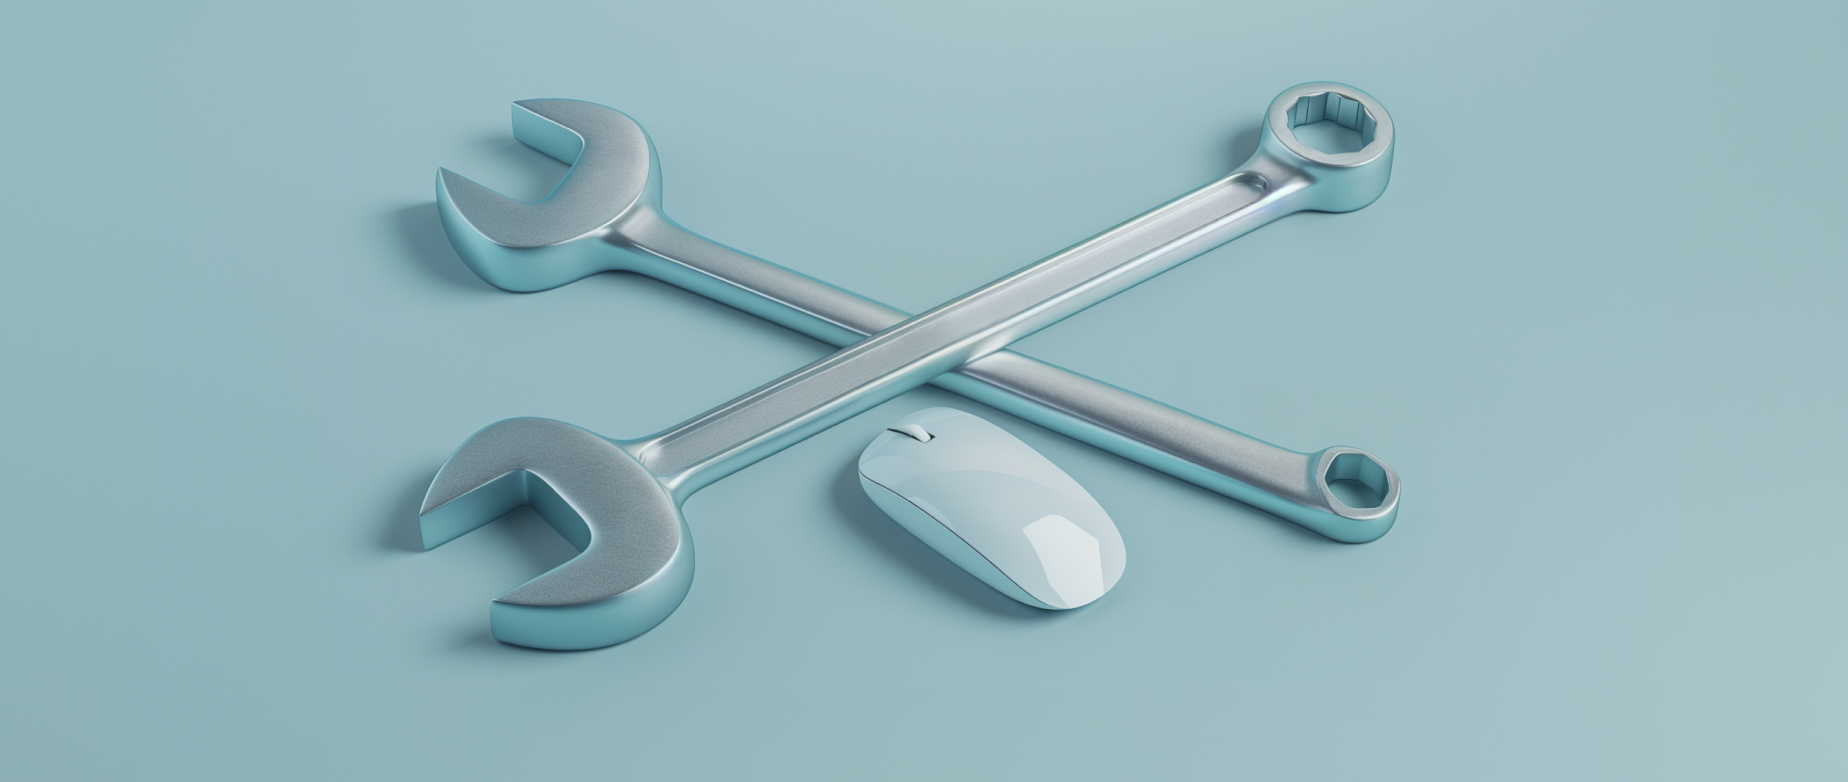 Two wrenches laying in an X next to a computer mouse on a light blue background.